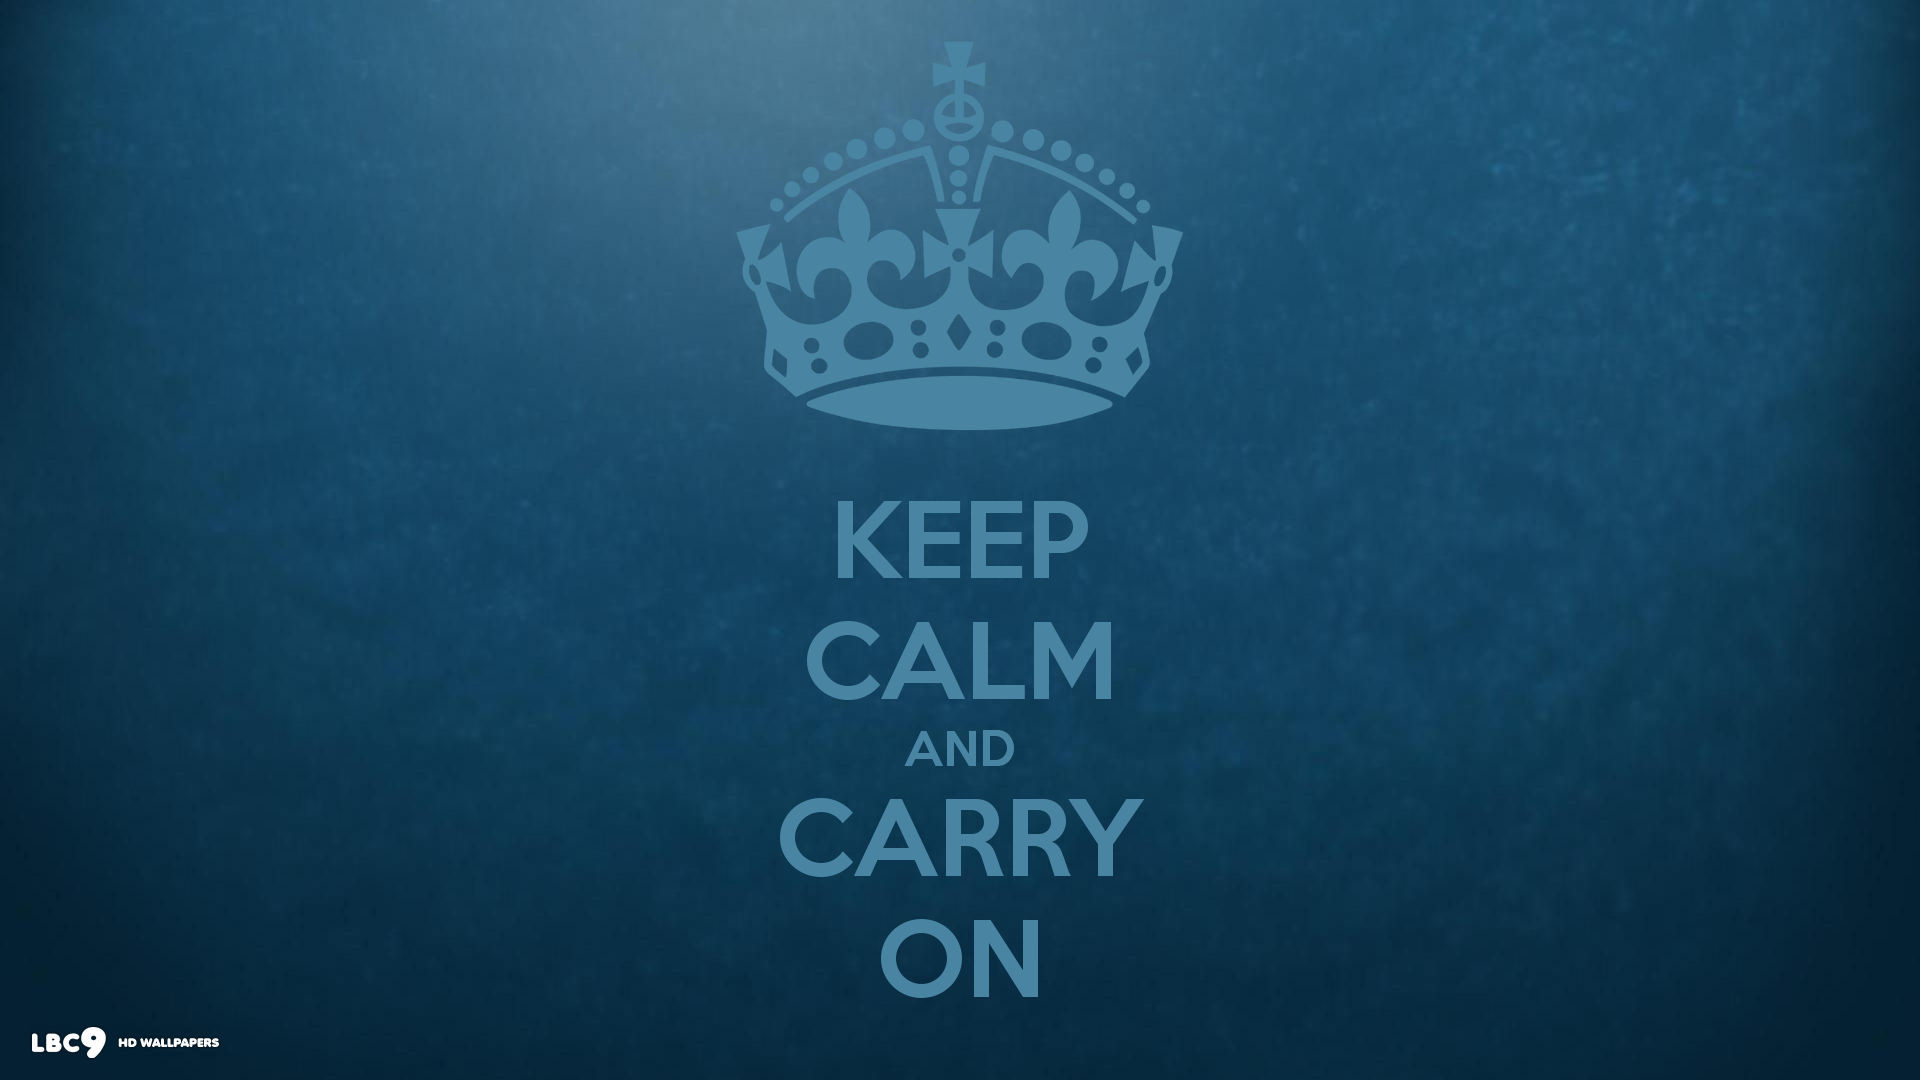 1920x1080, Keep Calm And Carry On Wallpaper 3 25 Typography - Keep Calm And Carry On Background - HD Wallpaper 